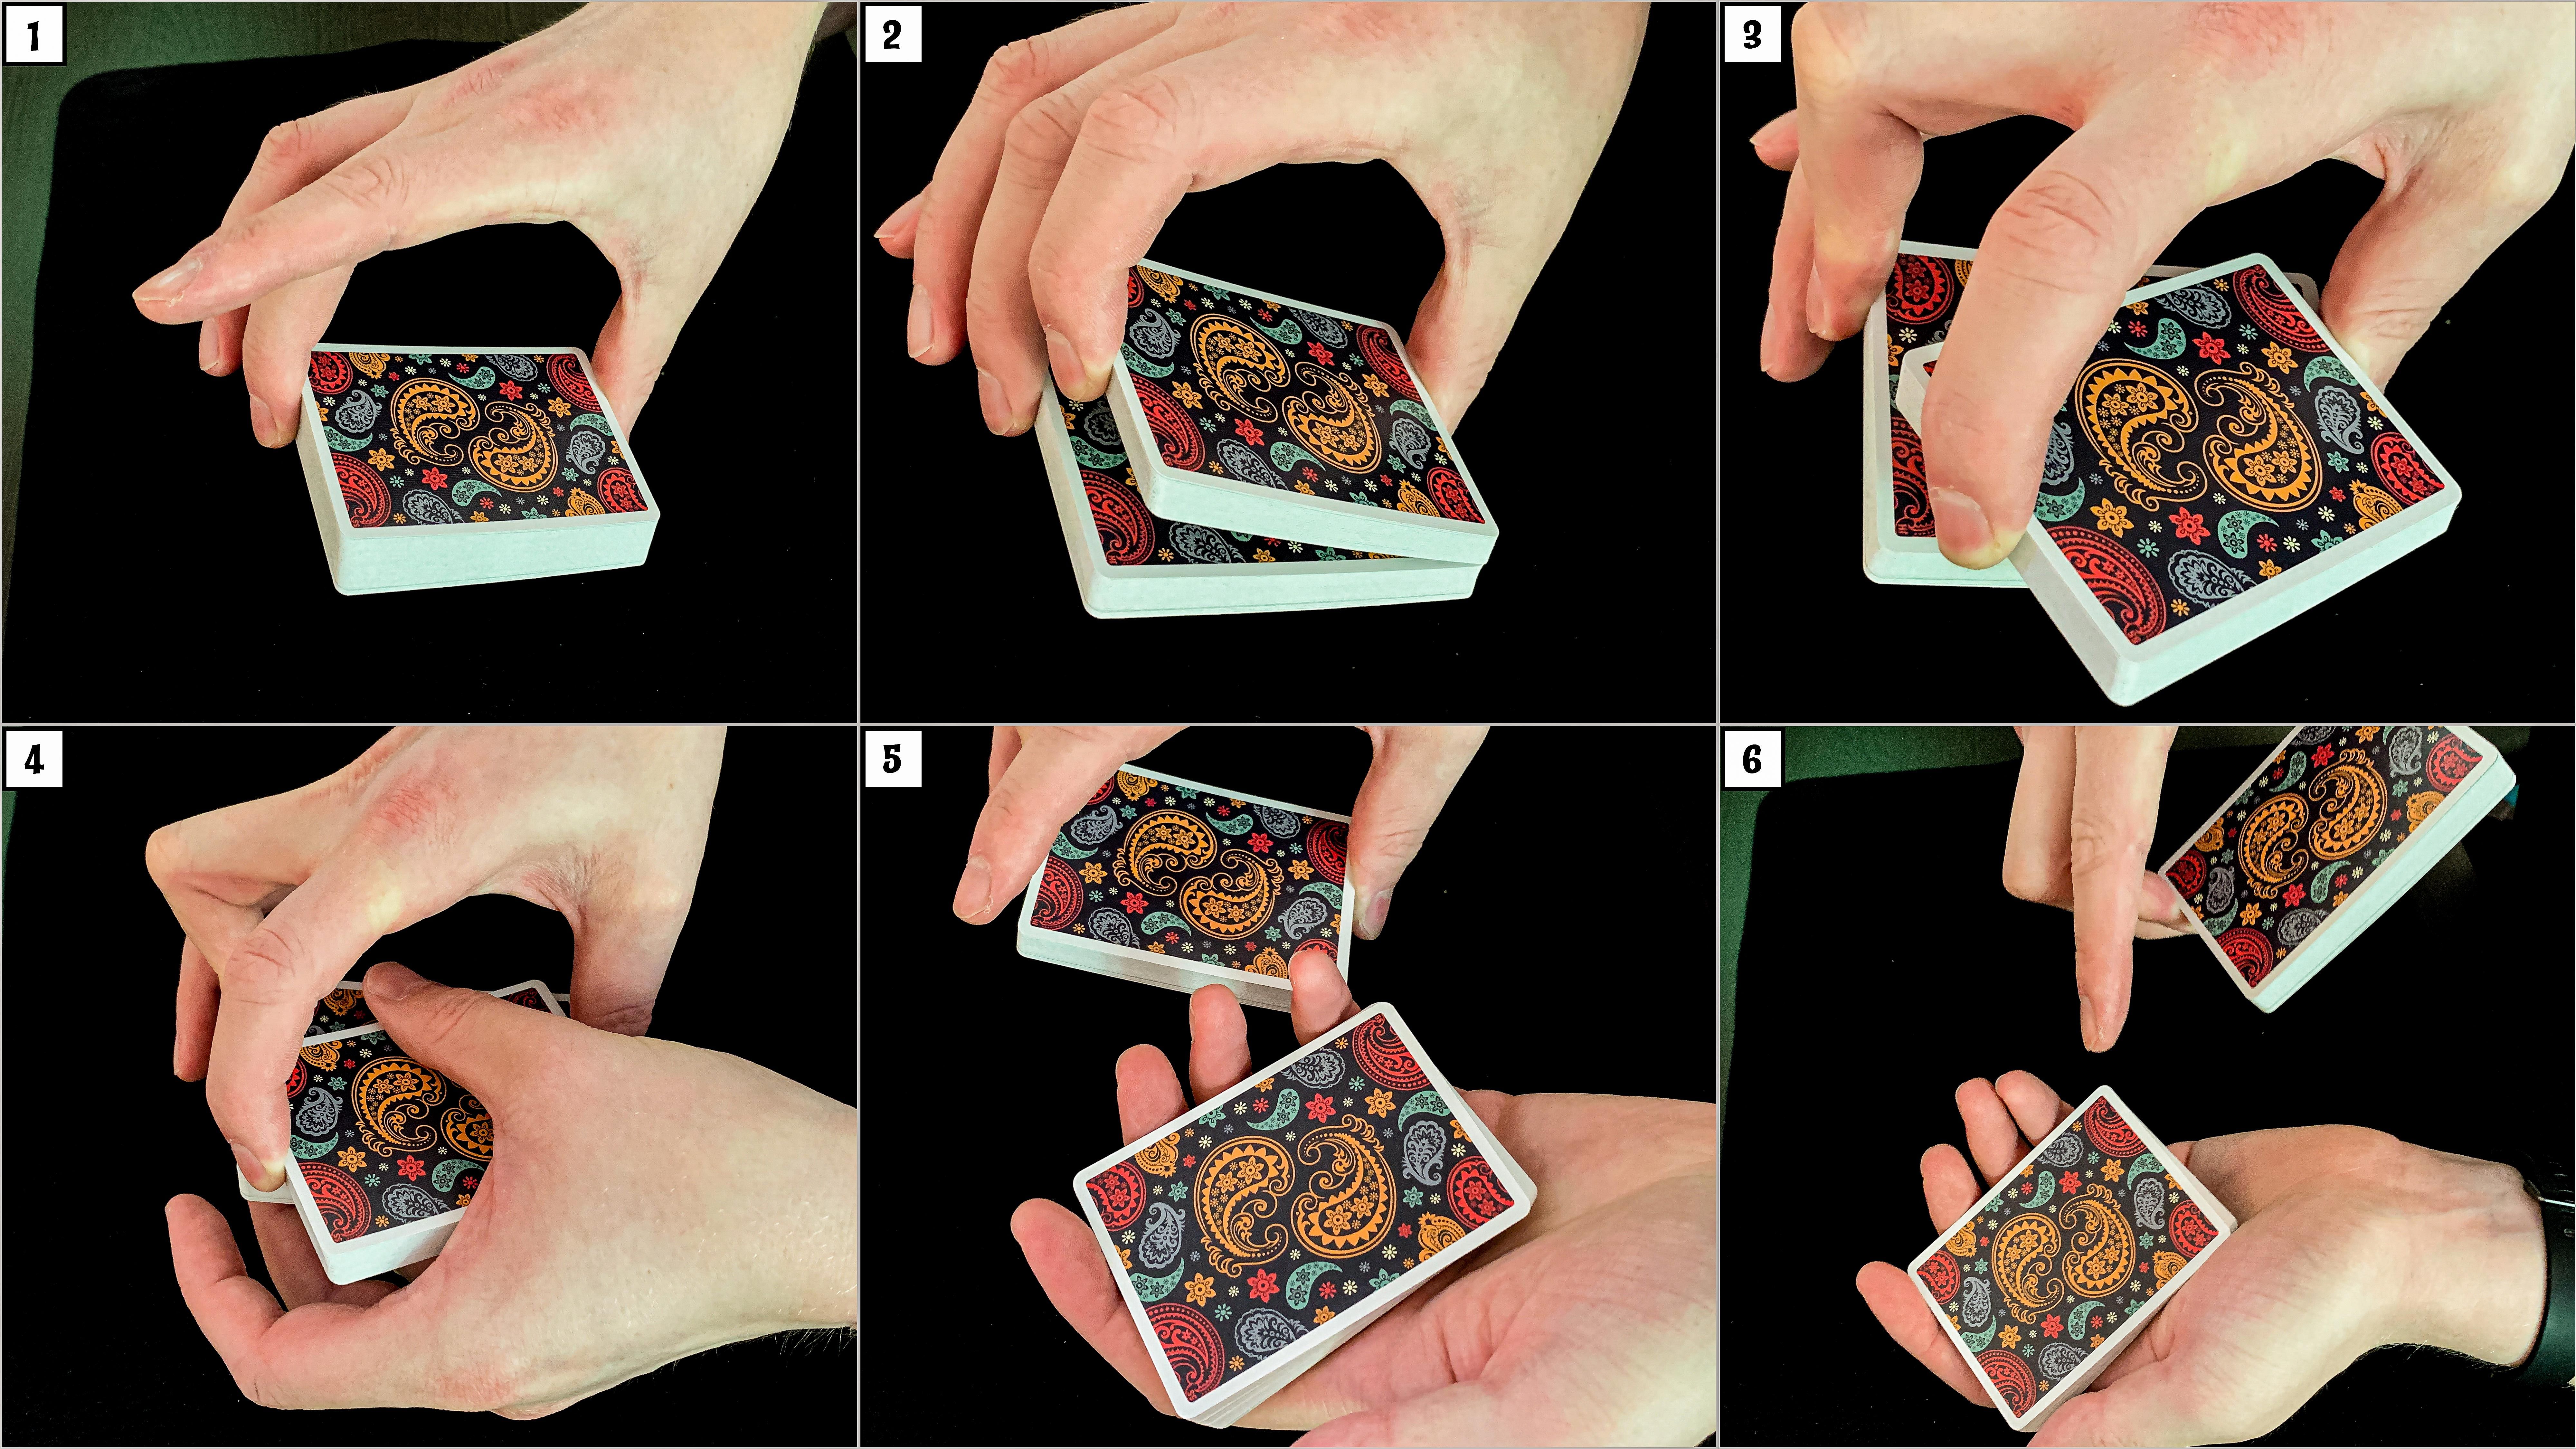 Dapper deck playing cards are used to teach the swing cut, a basic card sleight for card magicians